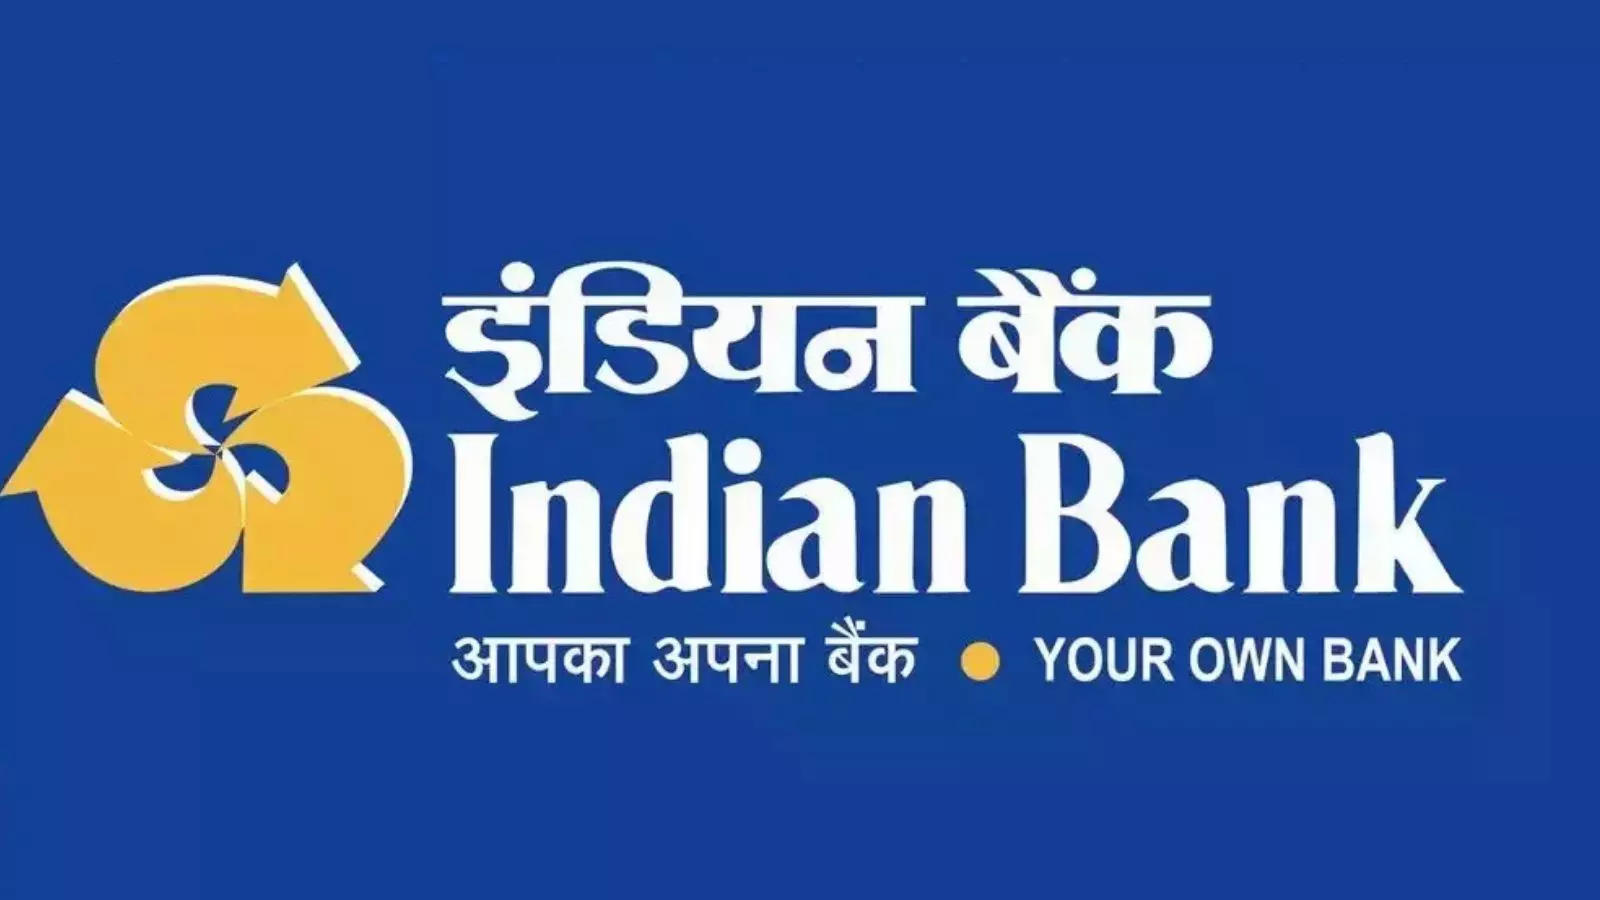 Indian Bank Q1 Results: Net profit soars 41% to Rs 2,403 crore, NII up 8% 